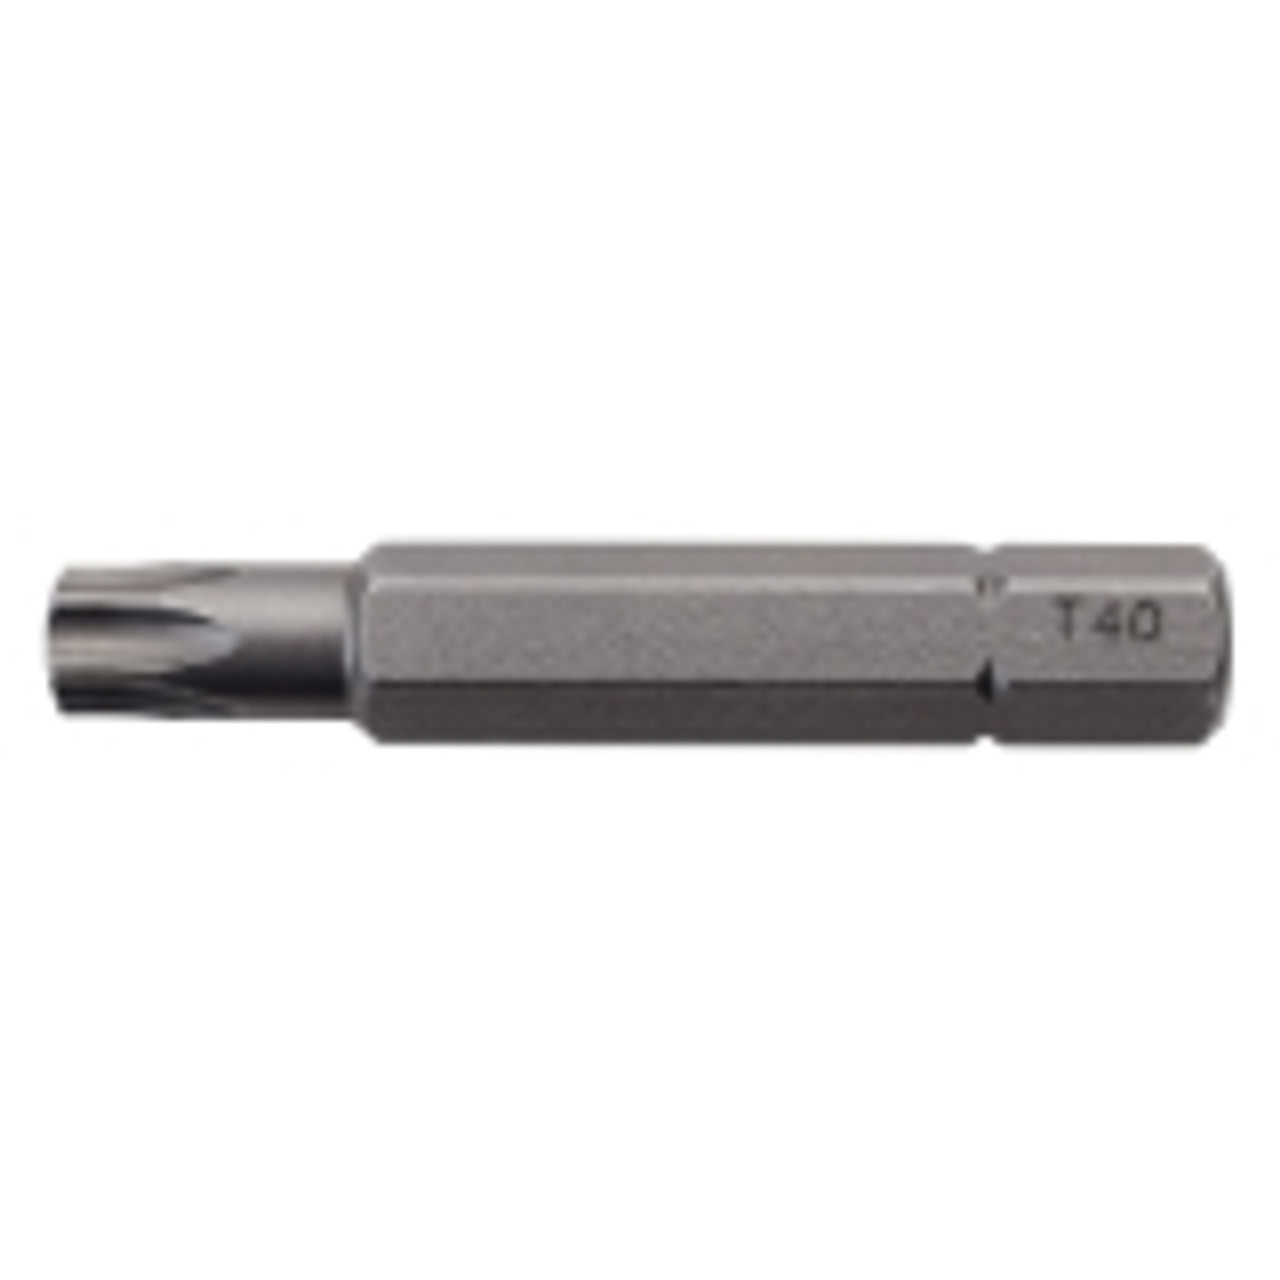 HECO Driver Bits T40 Drive with  for Woodworkers that have  available in Australia and New Zealand